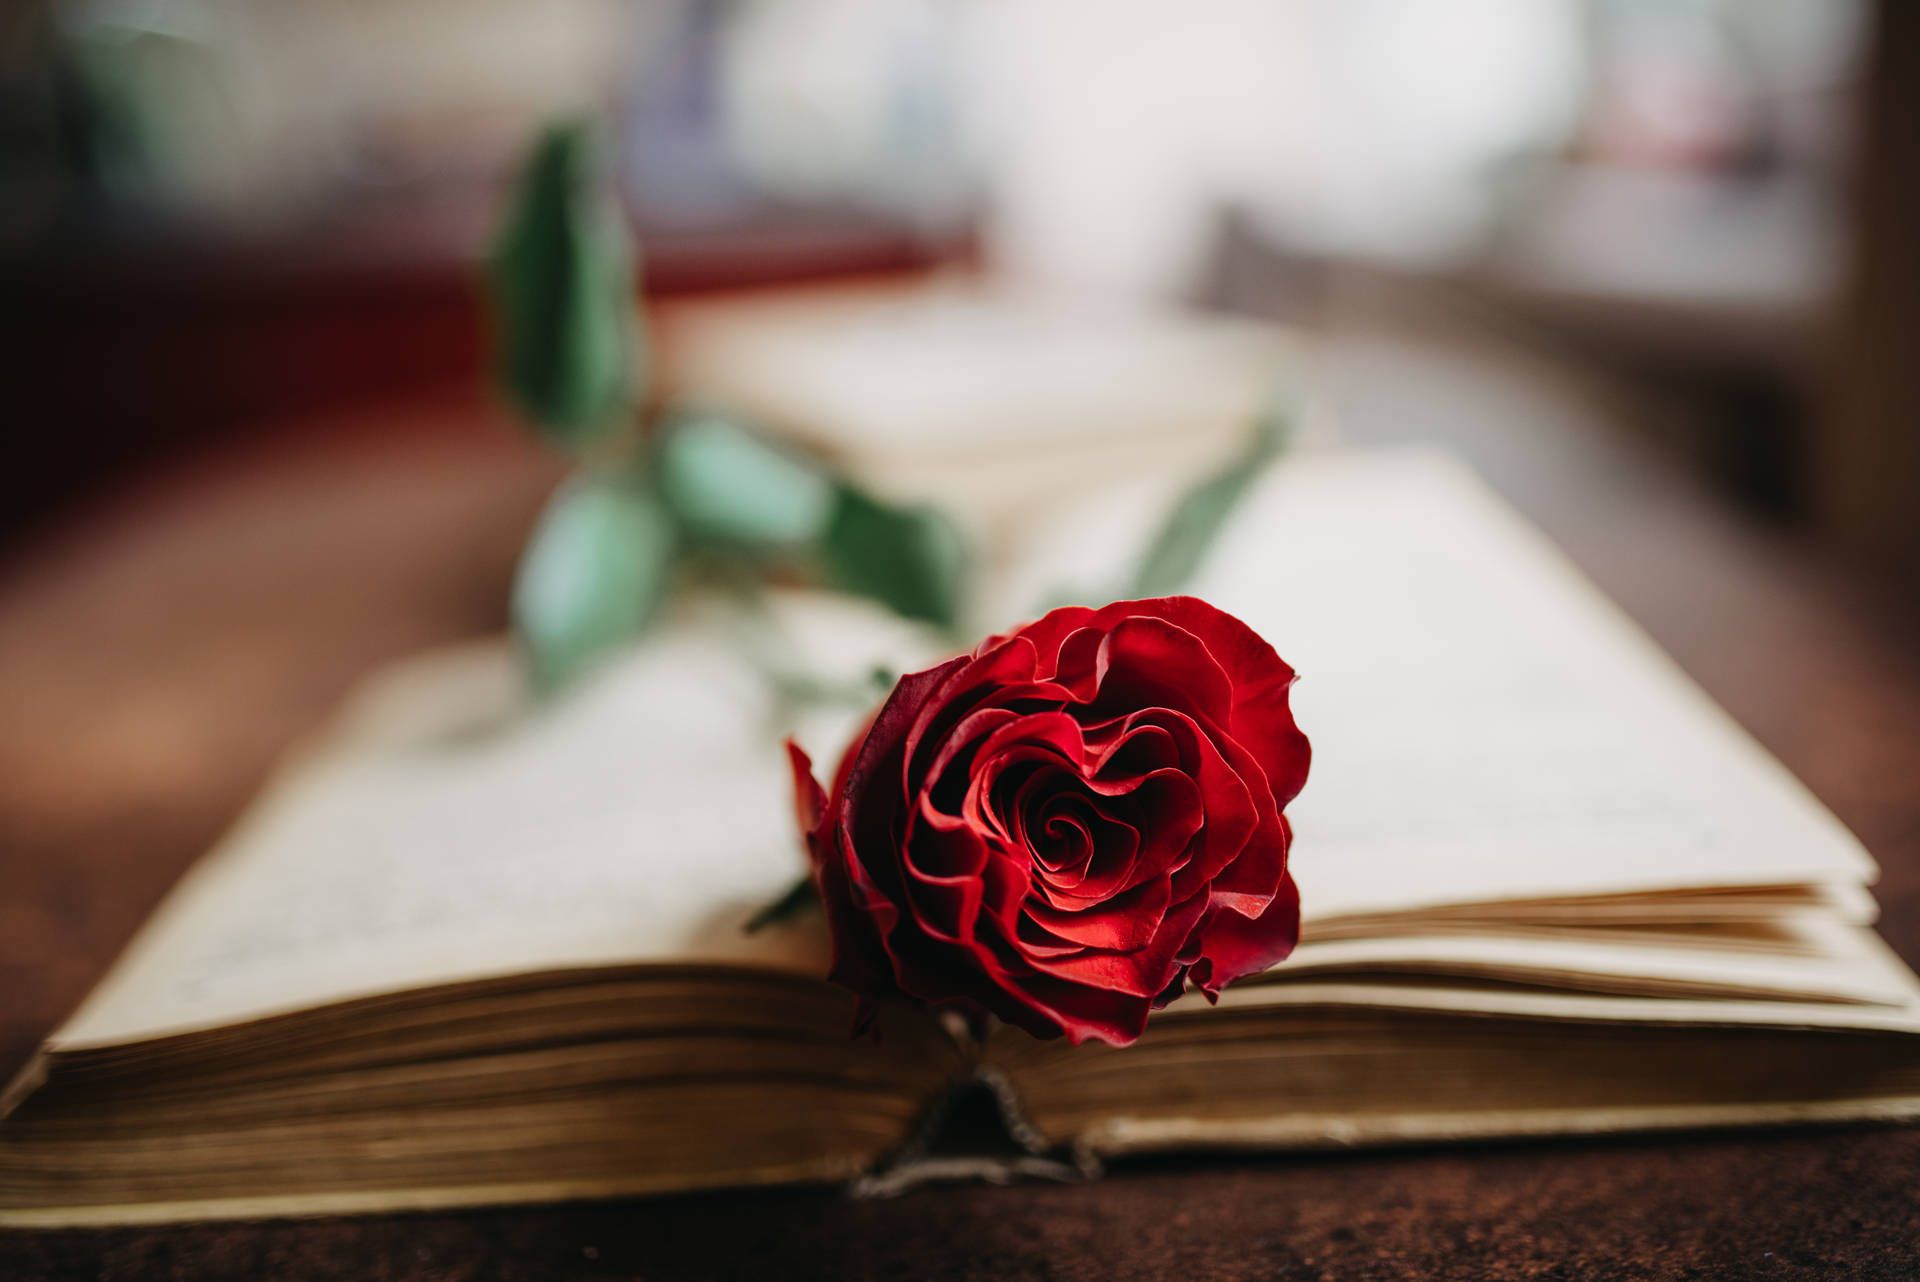 A red rose is sitting on top of an open book - Roses